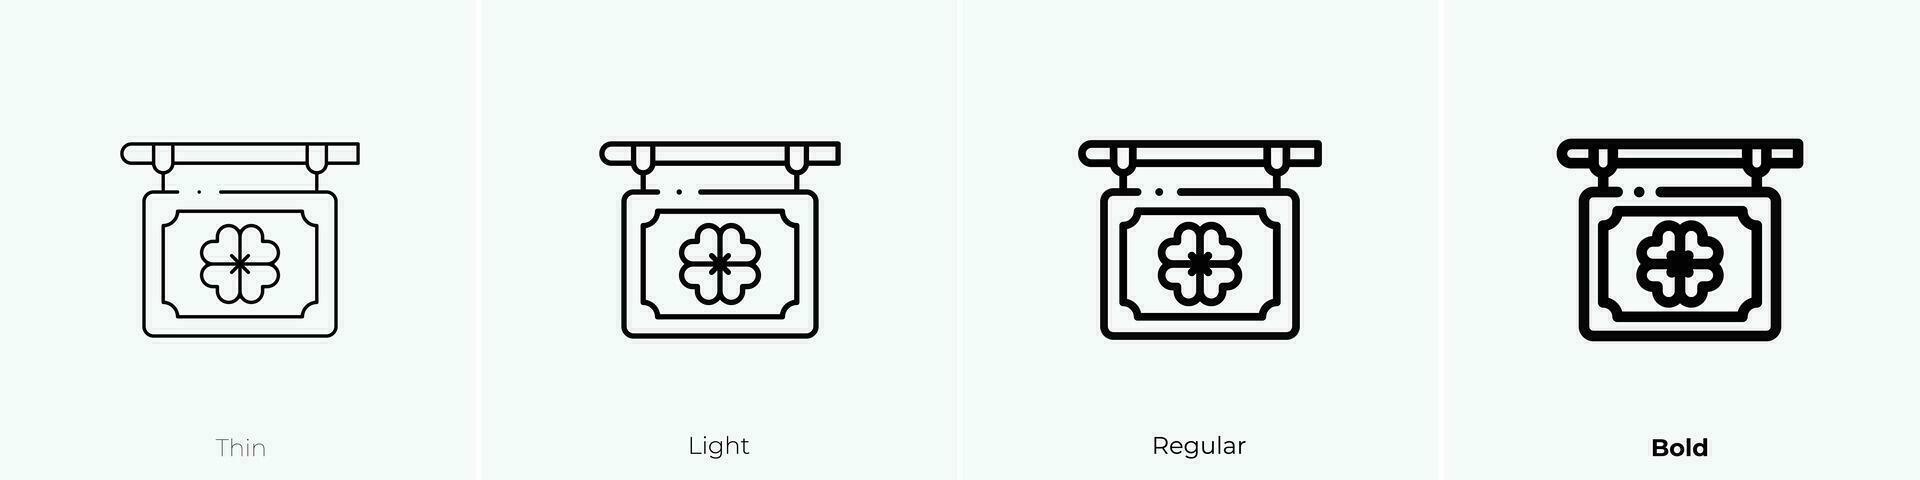 pub icon. Thin, Light, Regular And Bold style design isolated on white background vector